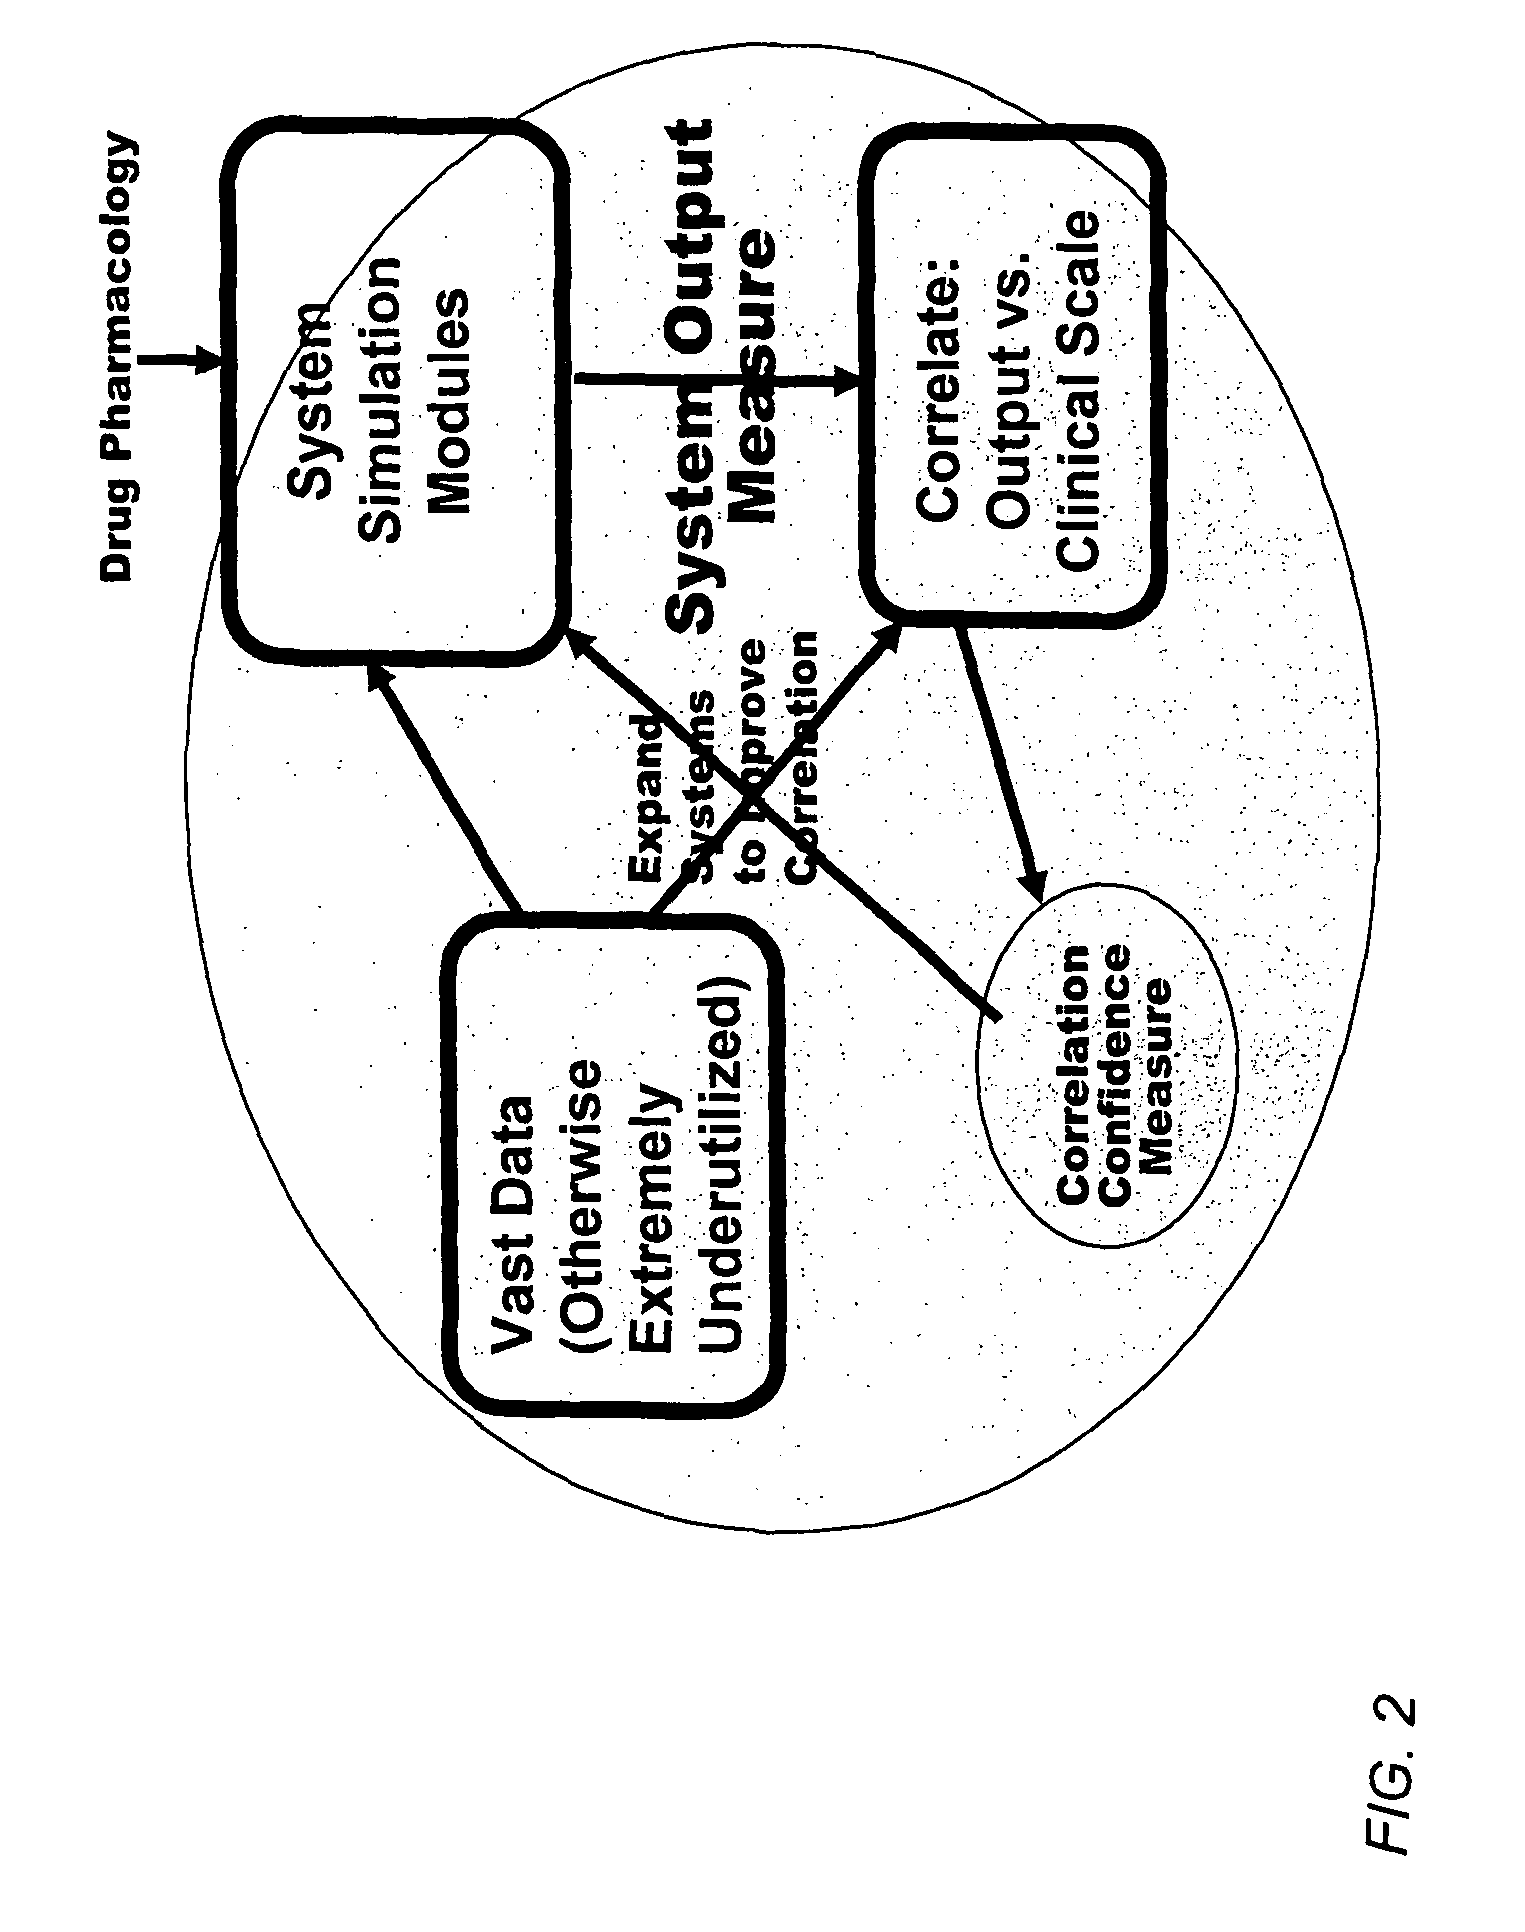 Method and apparatus for computer modeling of the interaction between and among cortical and subcortical areas in the human brain for the purpose of predicting the effect of drugs in psychiatric and cognitive diseases